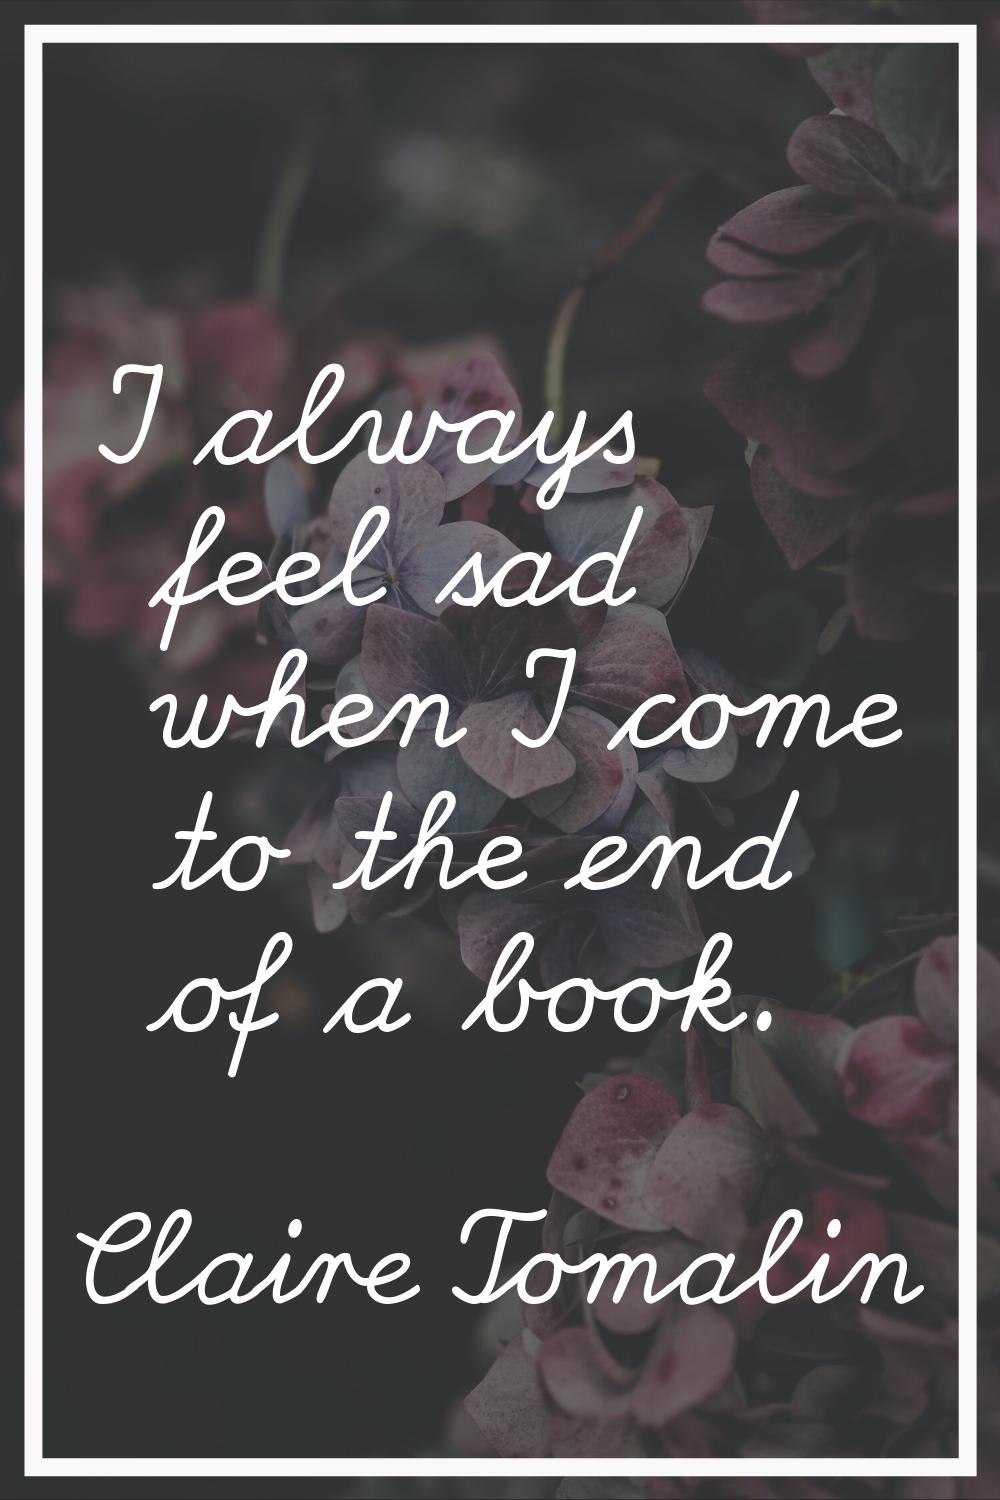 I always feel sad when I come to the end of a book.